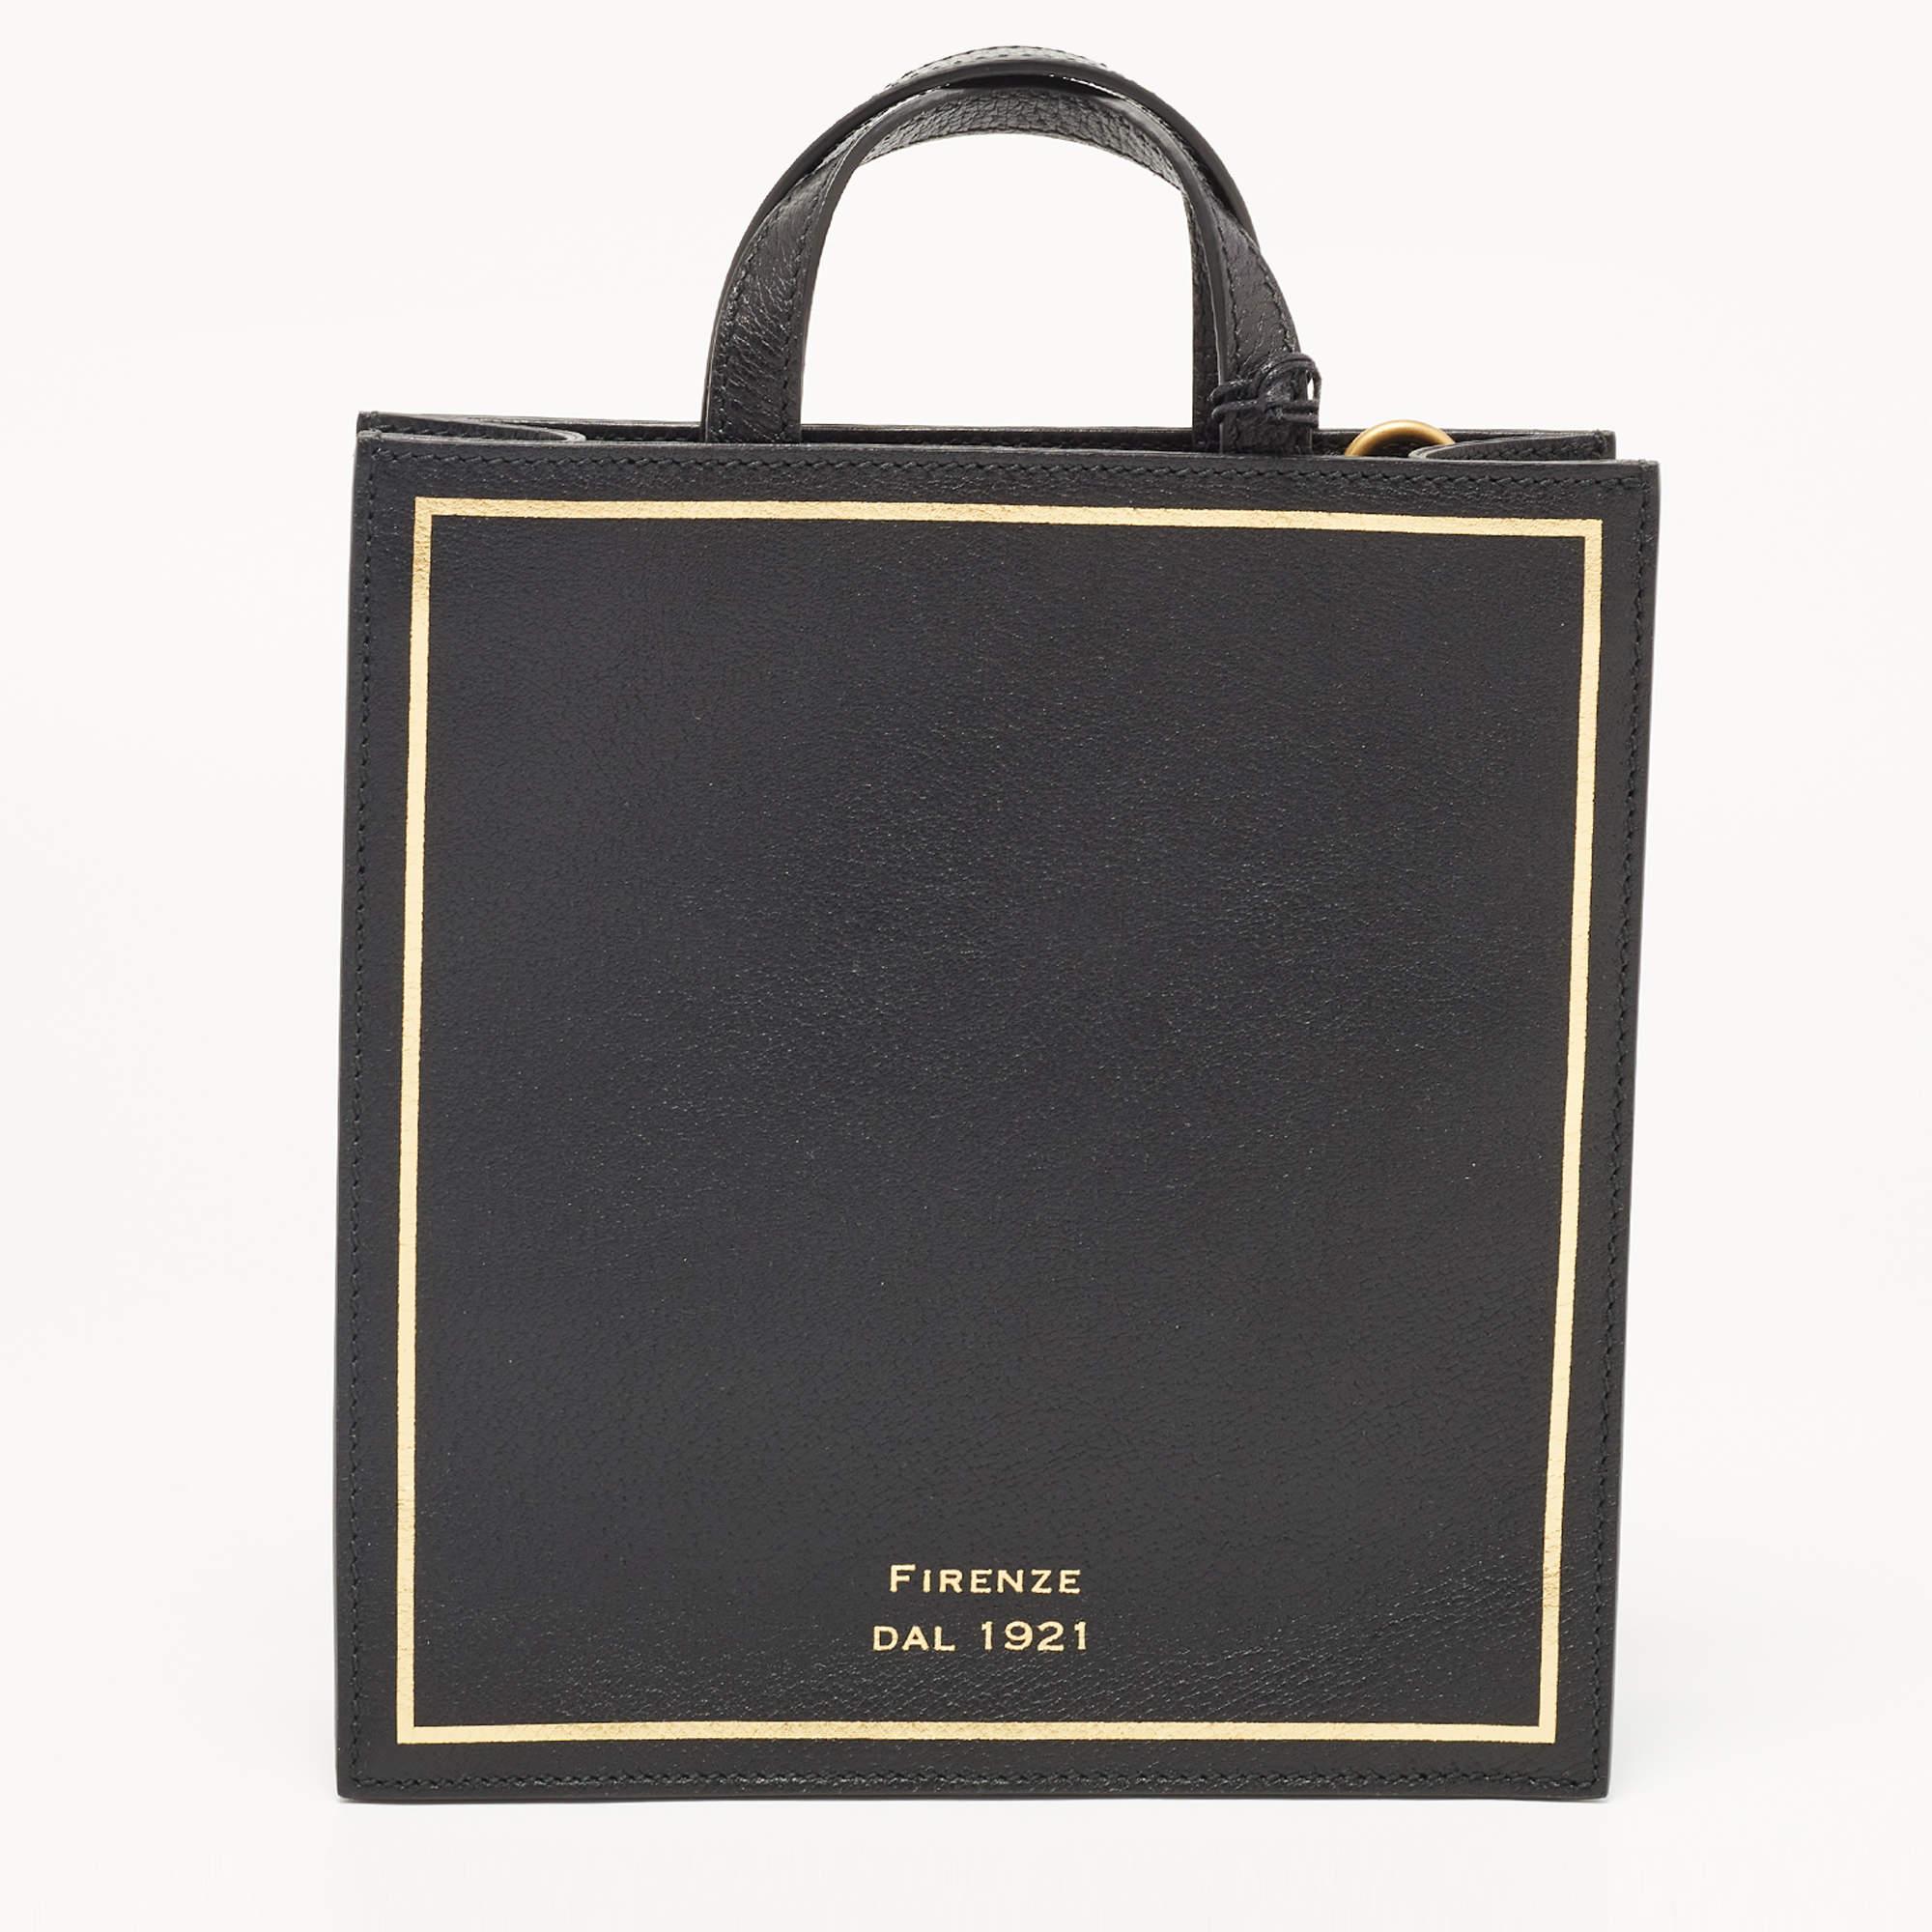 Created from high-quality materials, this tote is enriched with functional and classic elements. It can be carried around conveniently, and its interior is perfectly sized to keep your belongings with ease.

Includes: Original Box, Info Booklet,